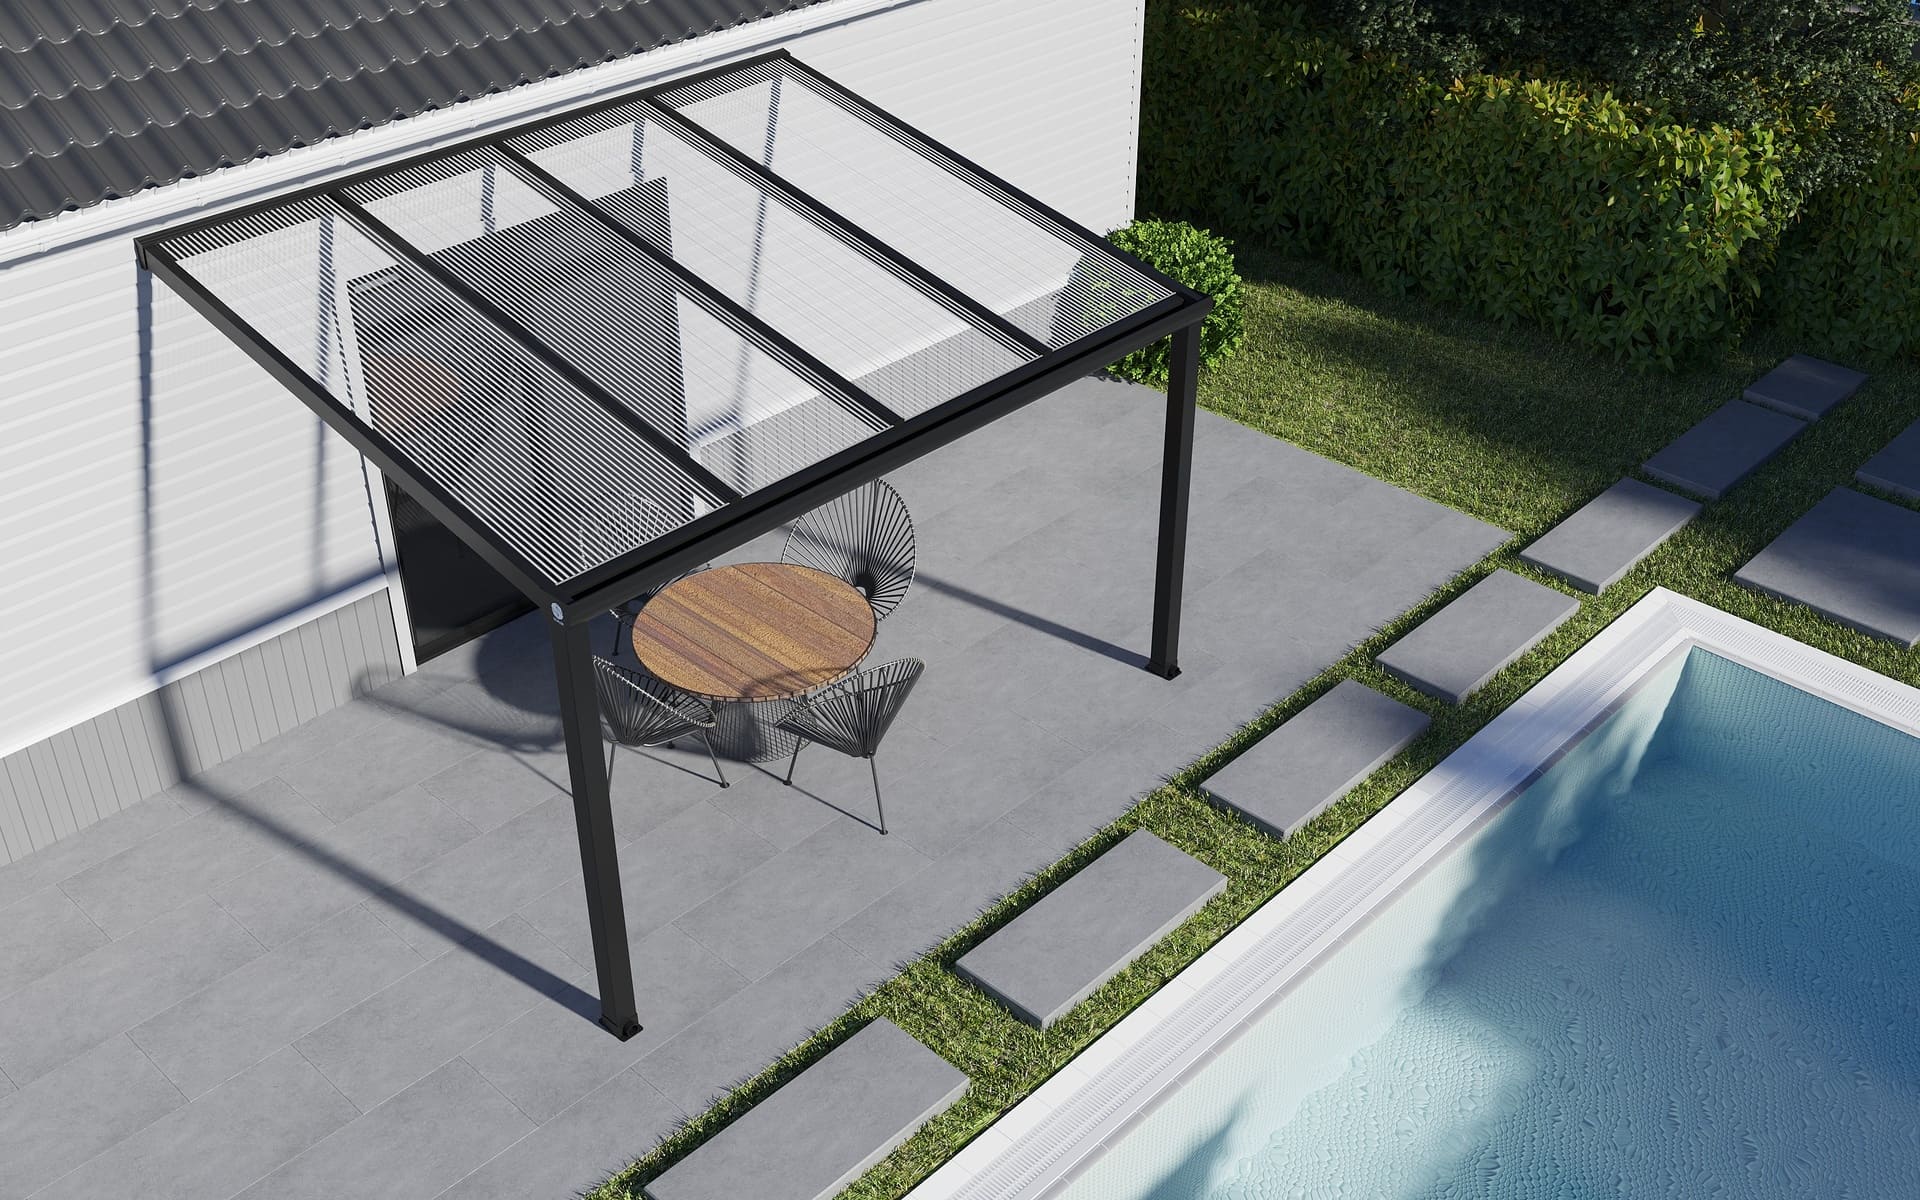 Clear Polycarbonate Patio Cover